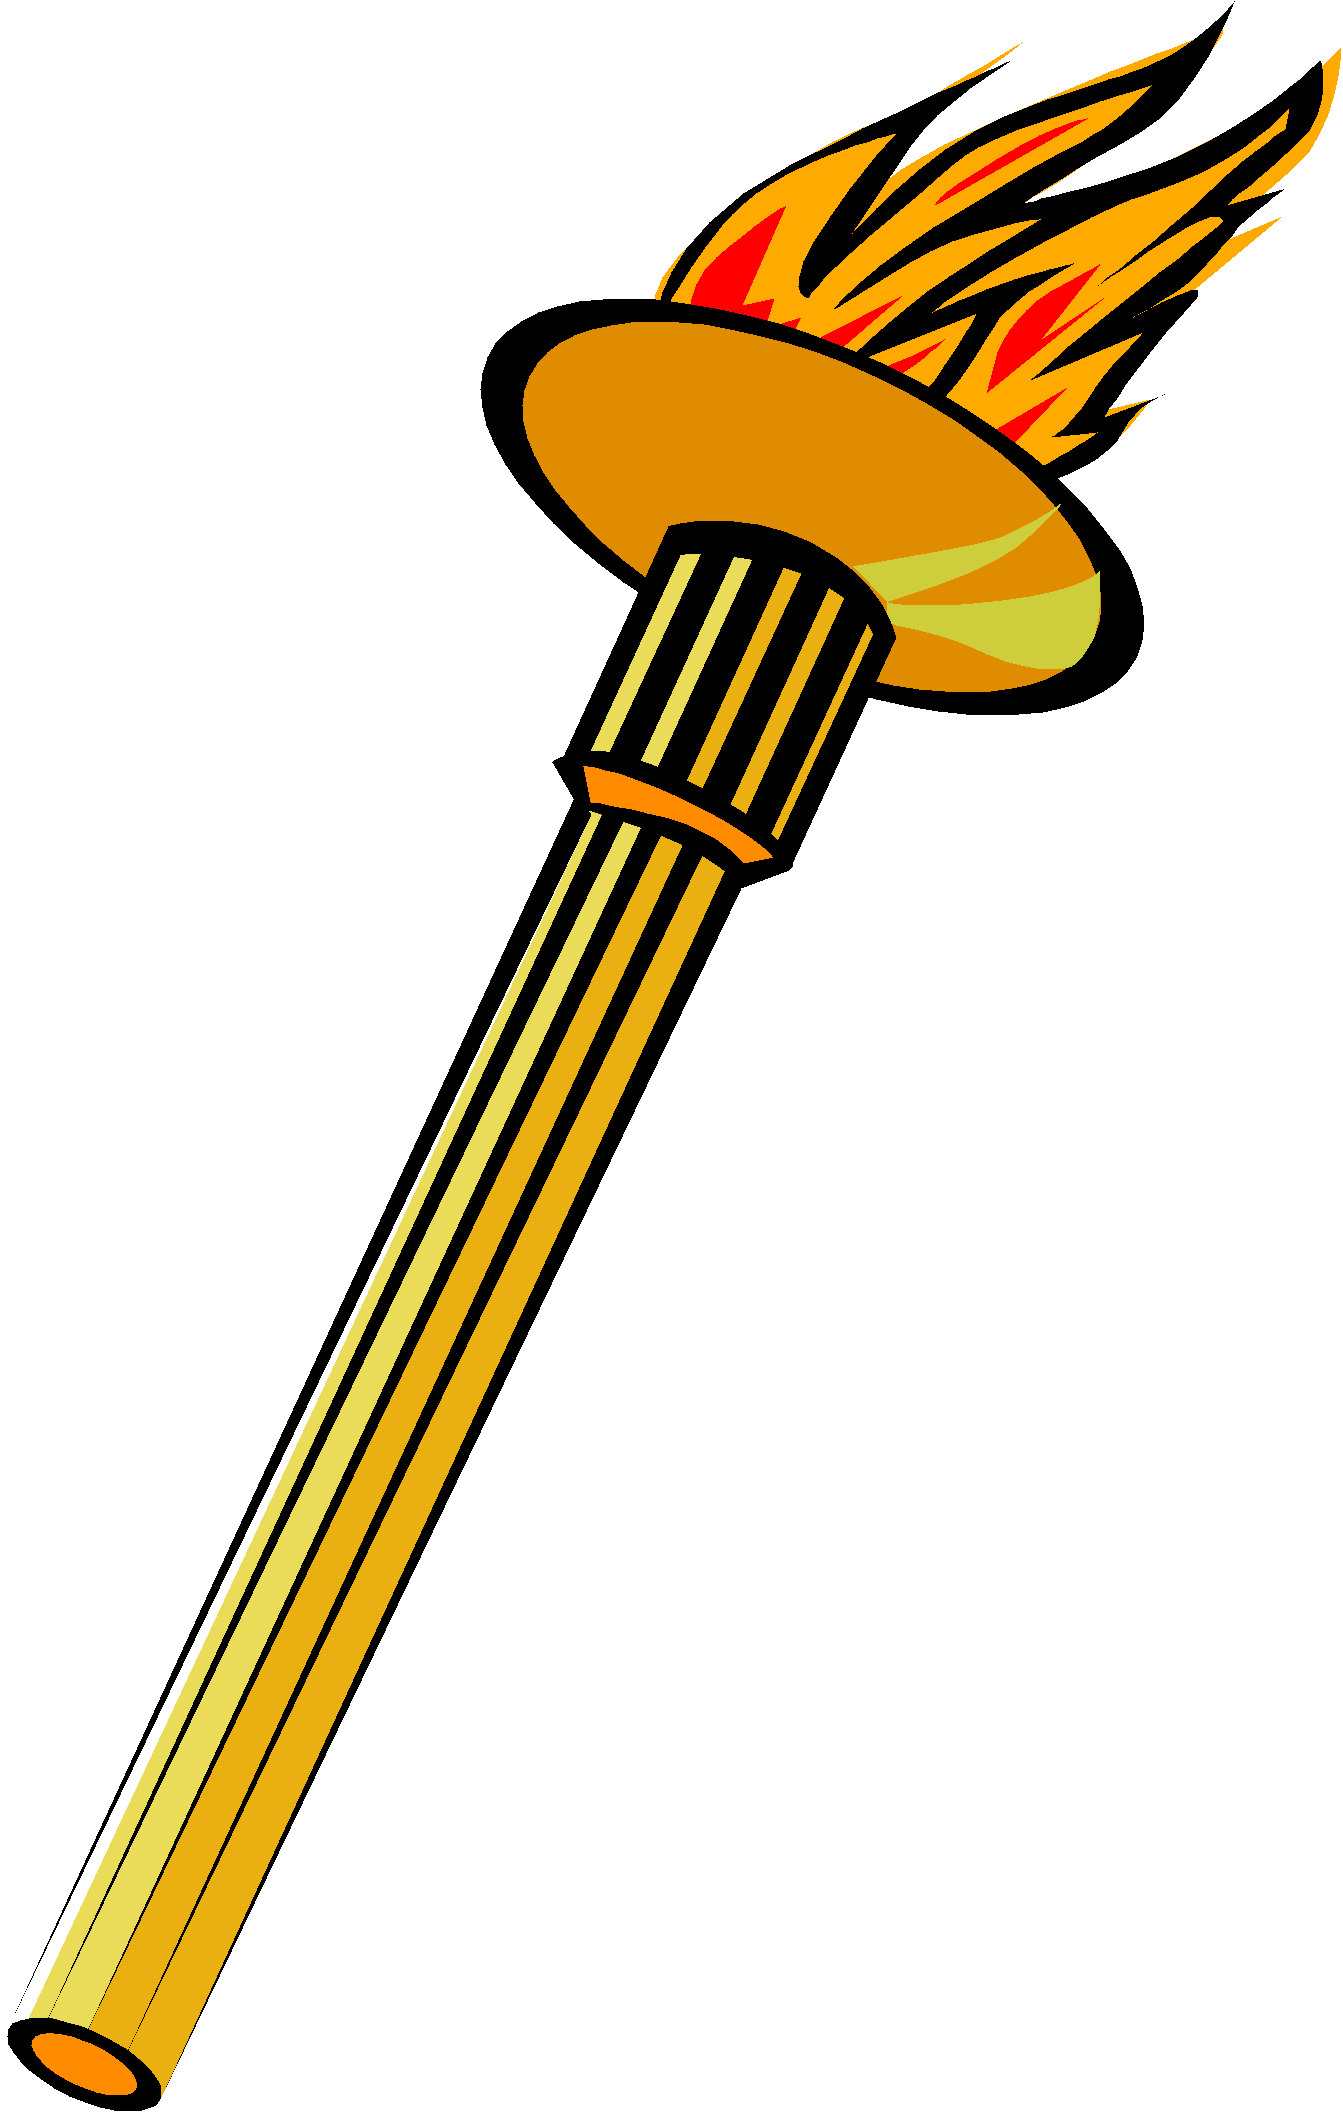 torch clipart runner olympic